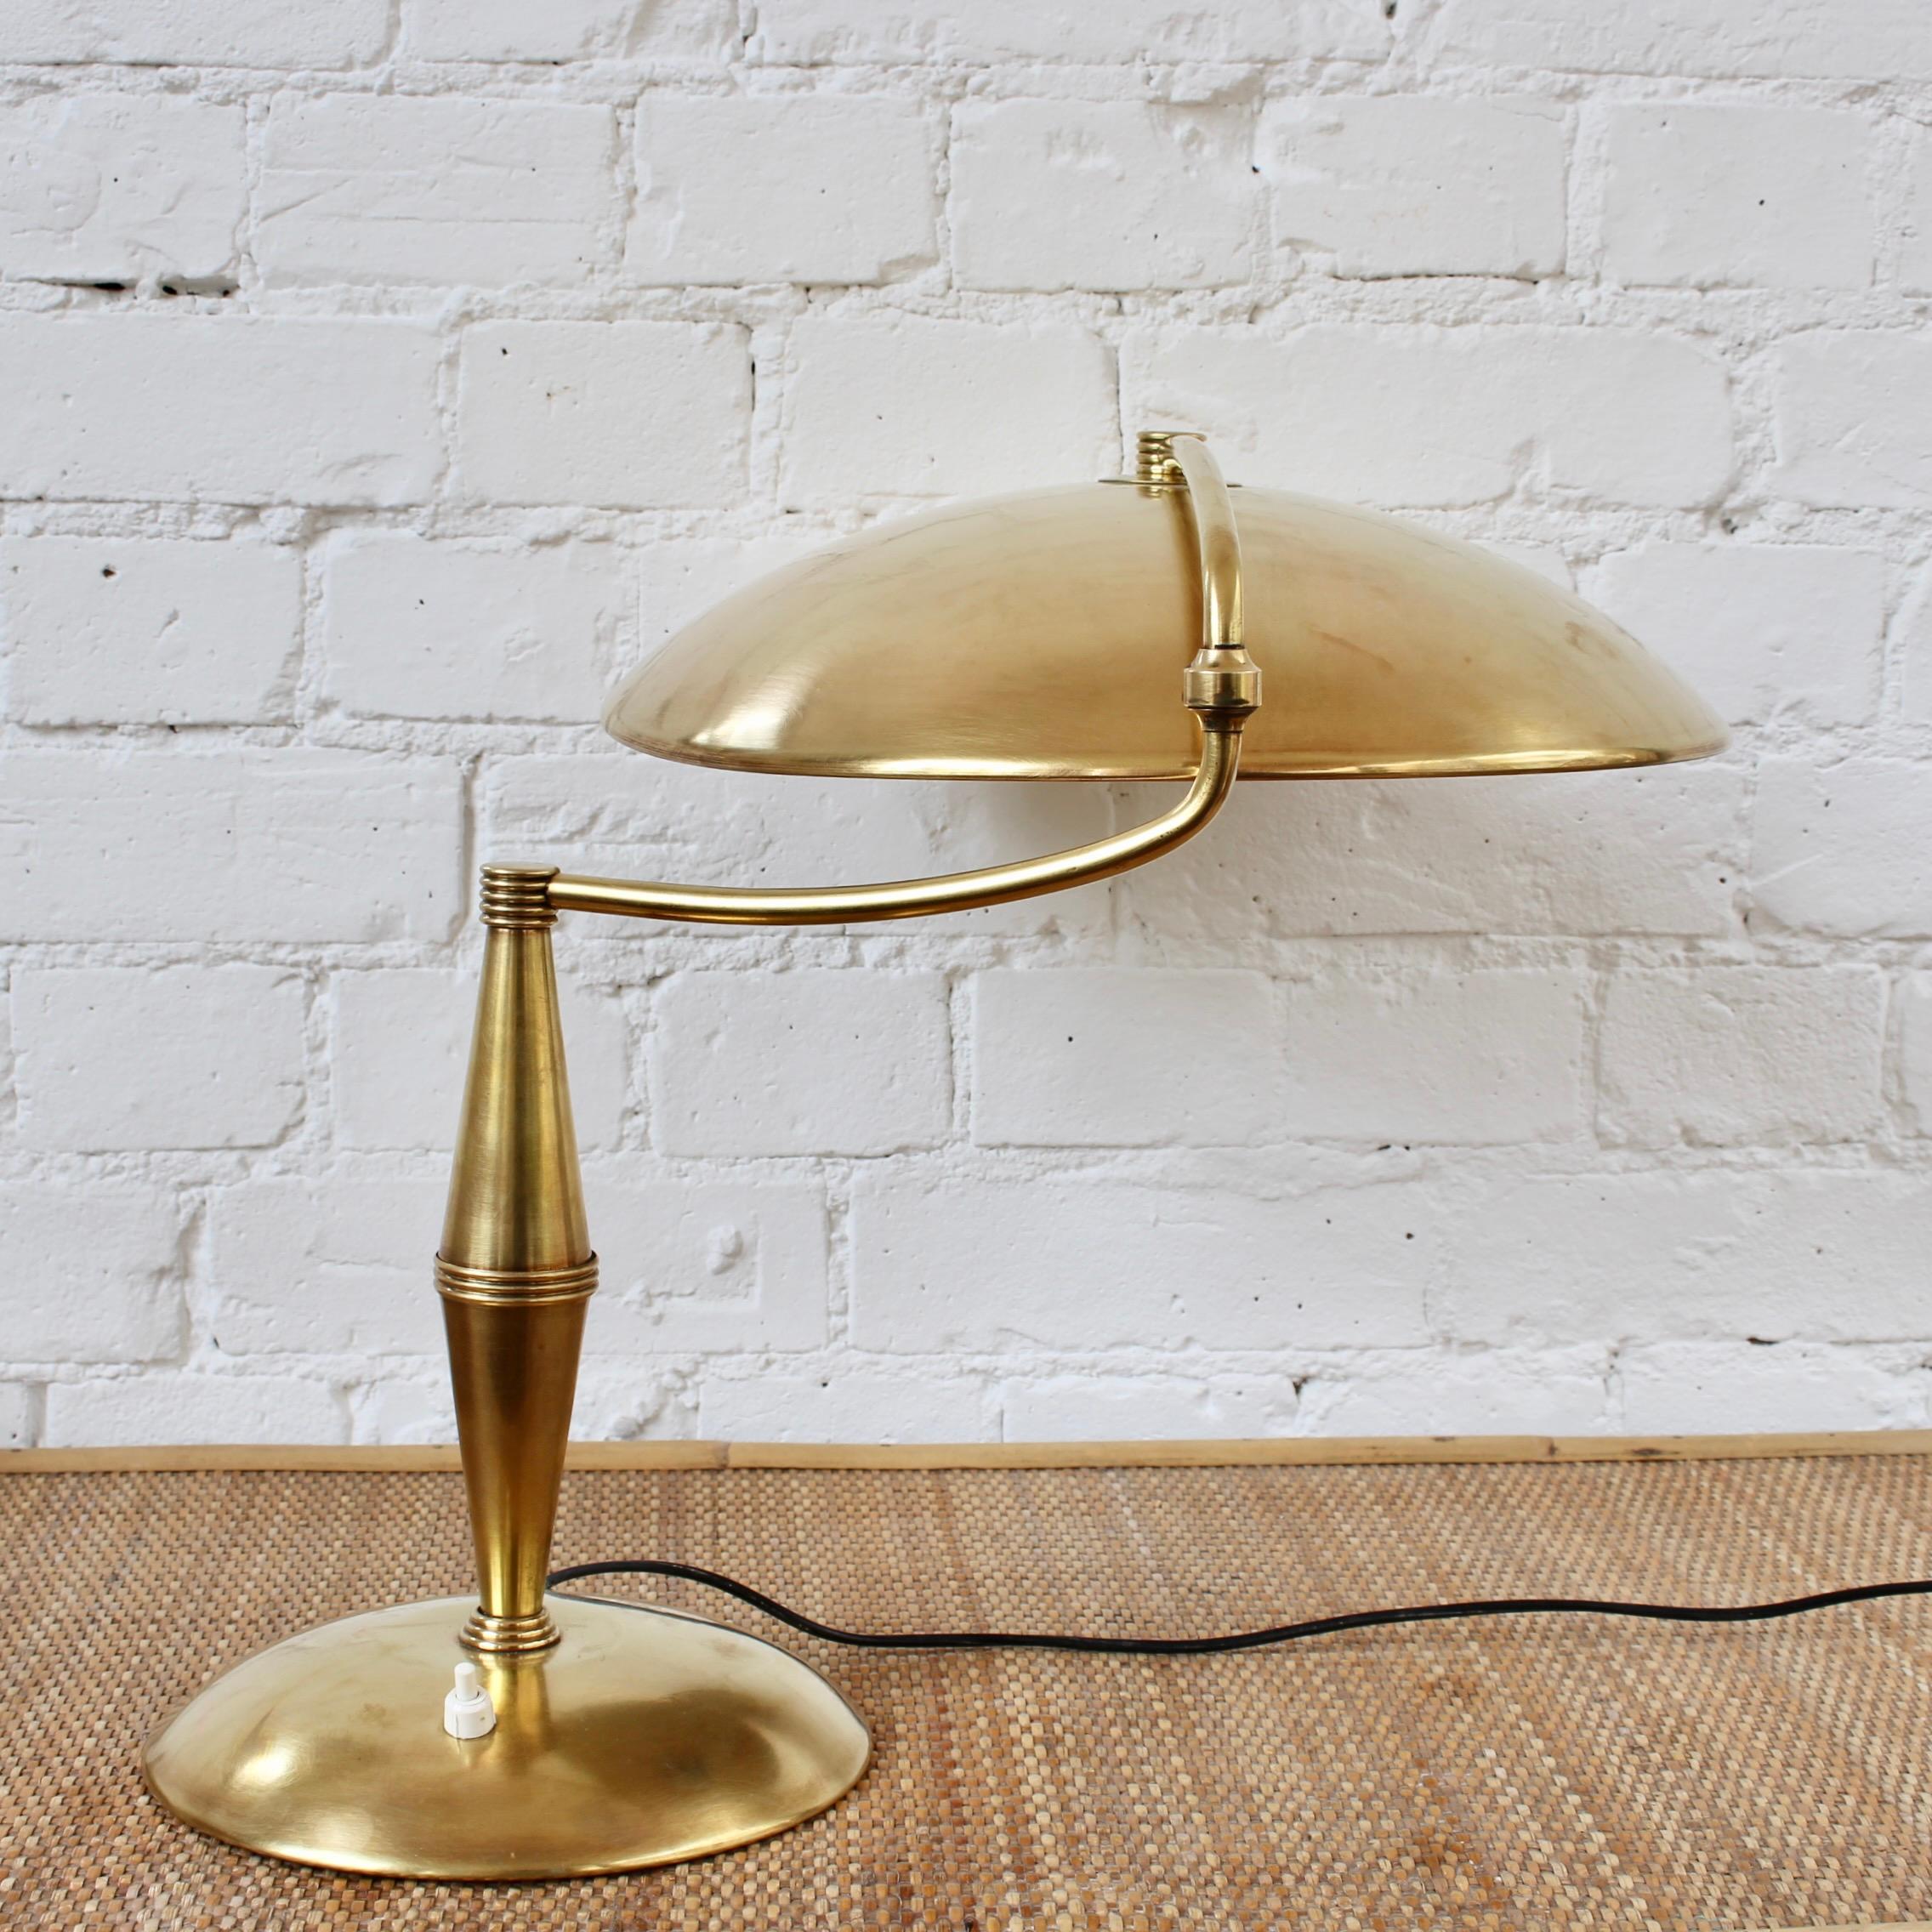 Italian Vintage Brass Table Lamp with Swivel Arm 'circa 1950s' For Sale 1